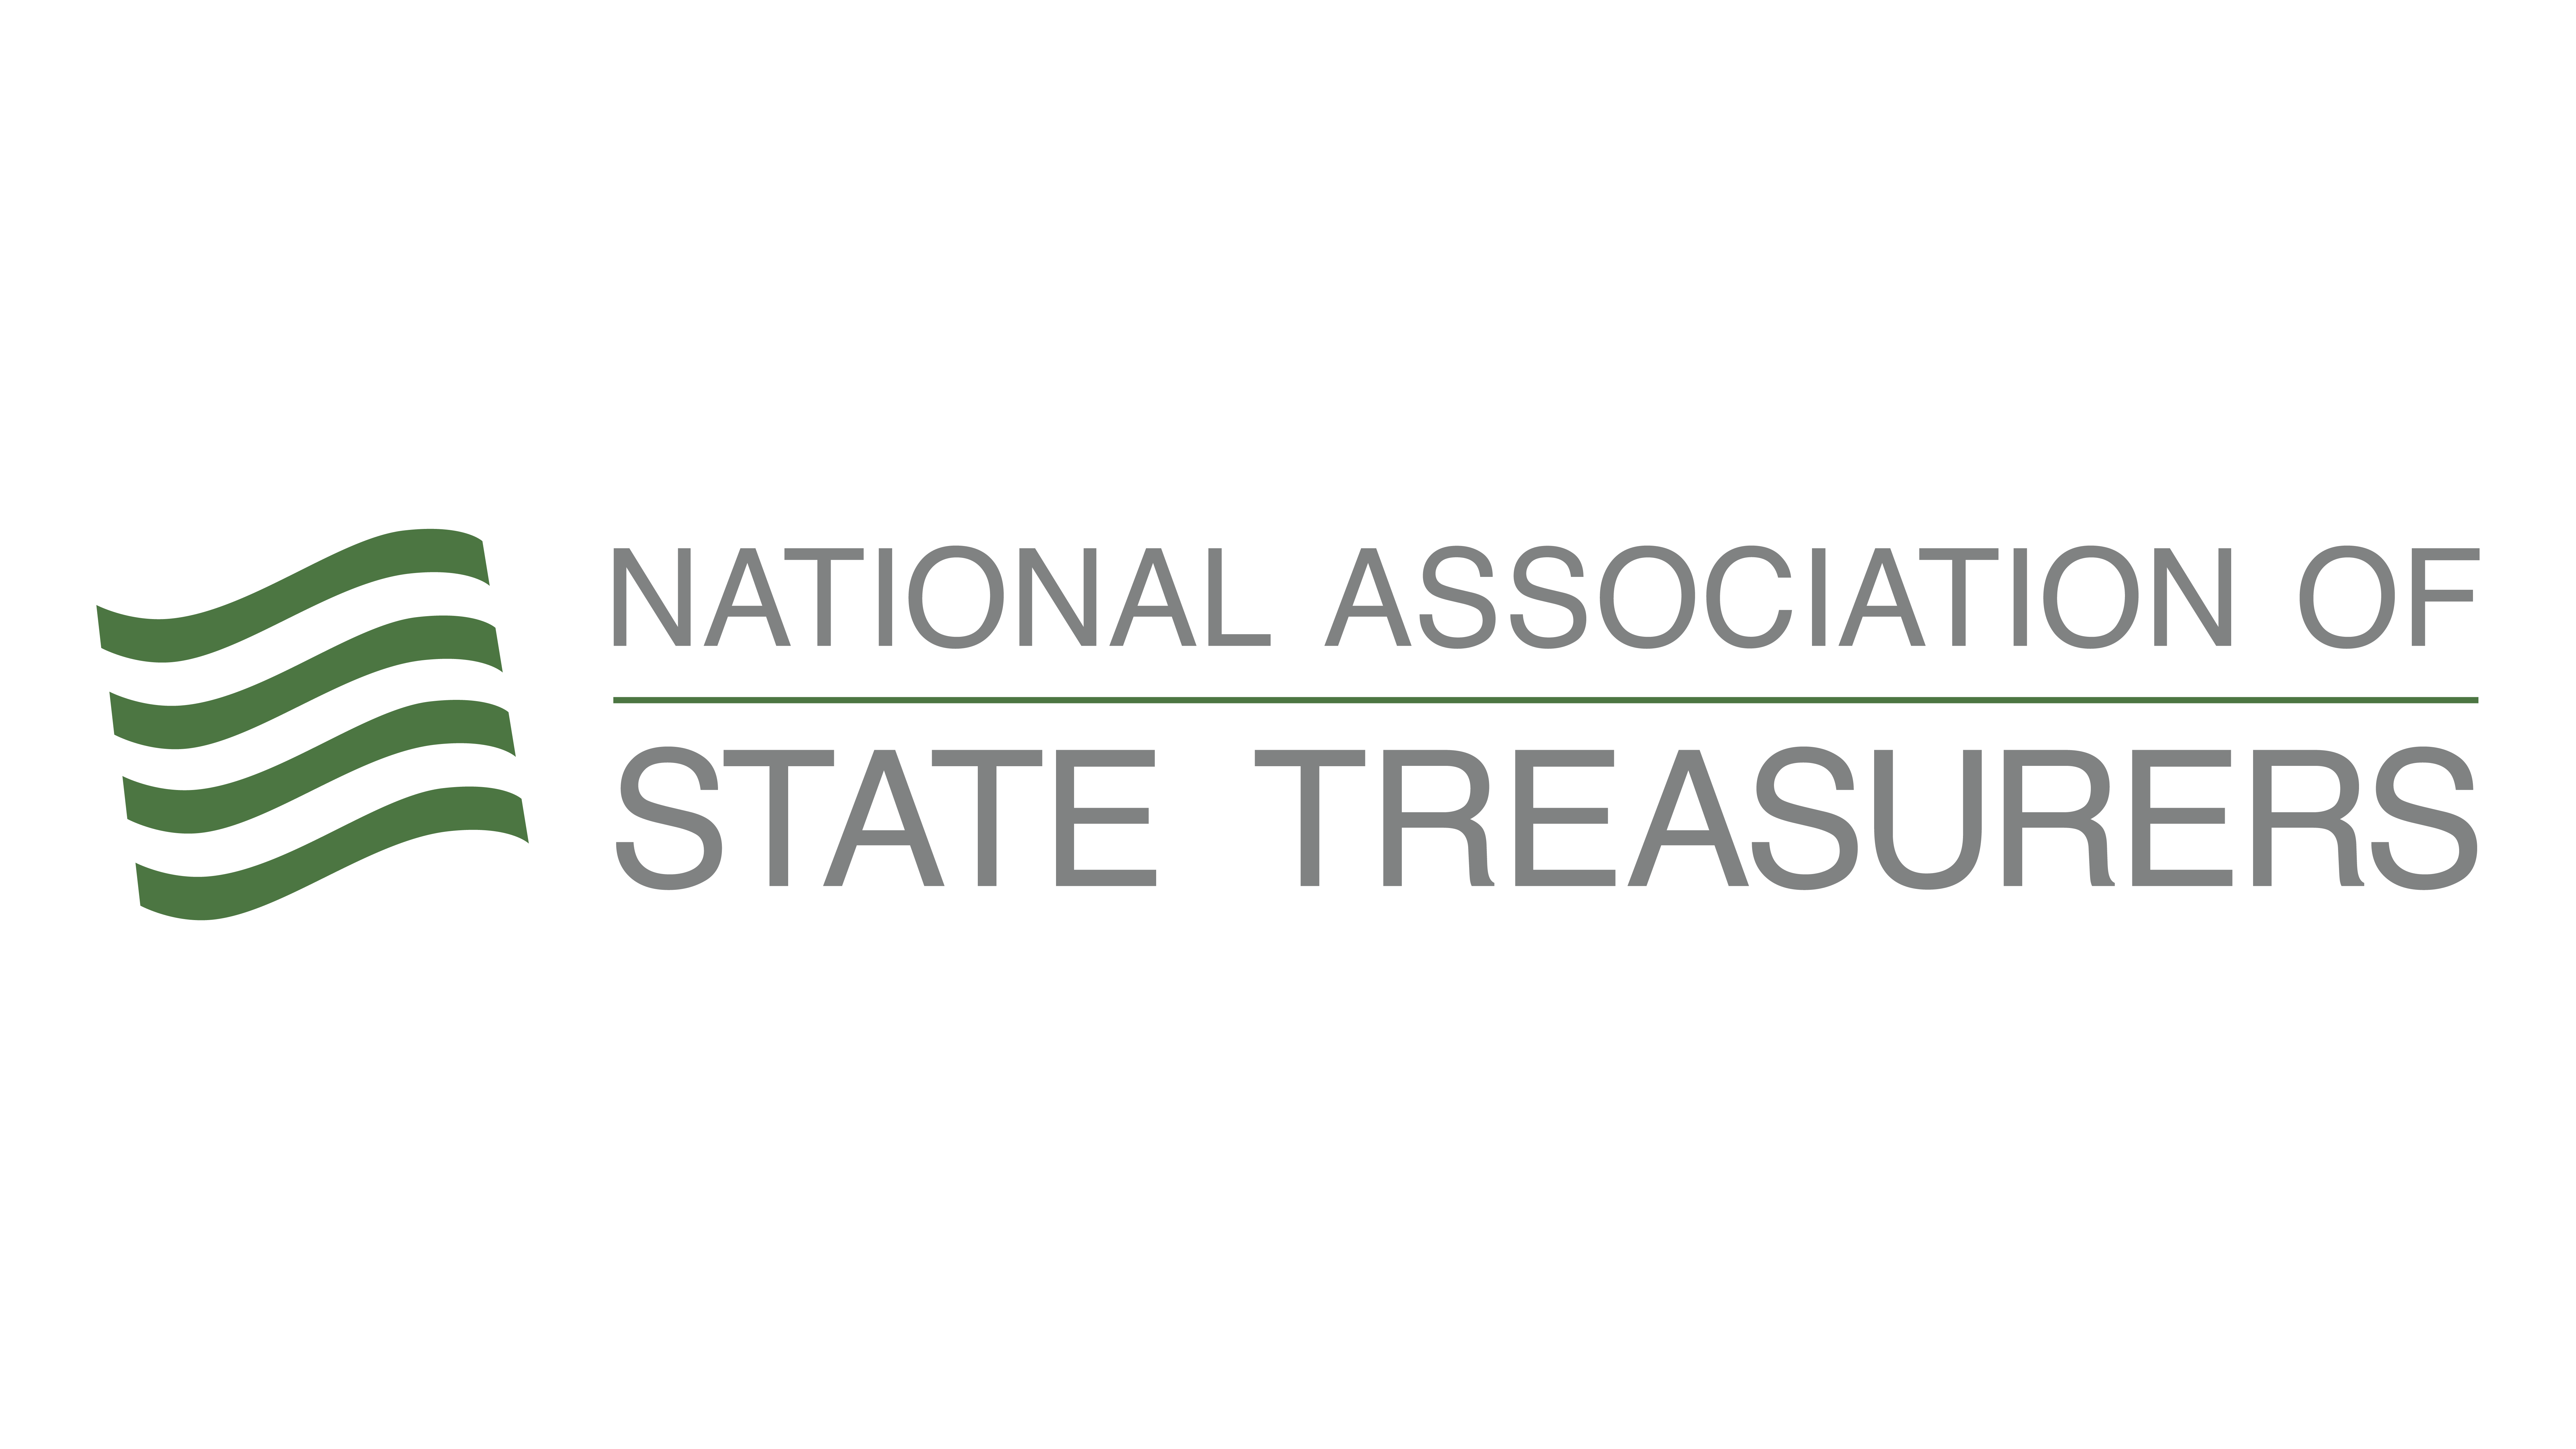 National Association of State Treasurers